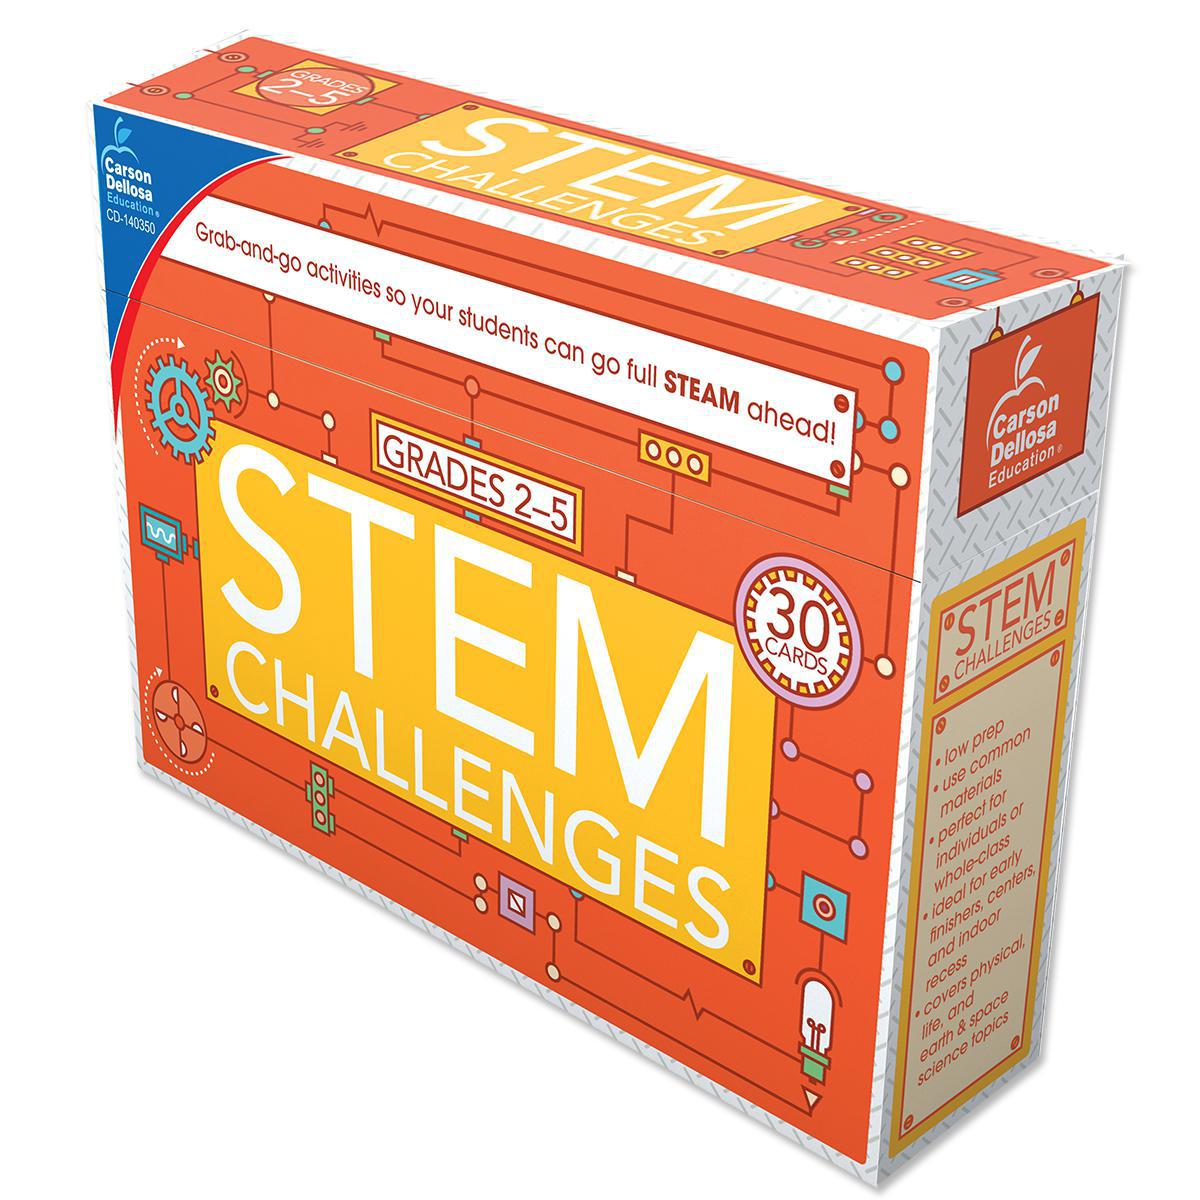  STEM Challenges Learning Cards 